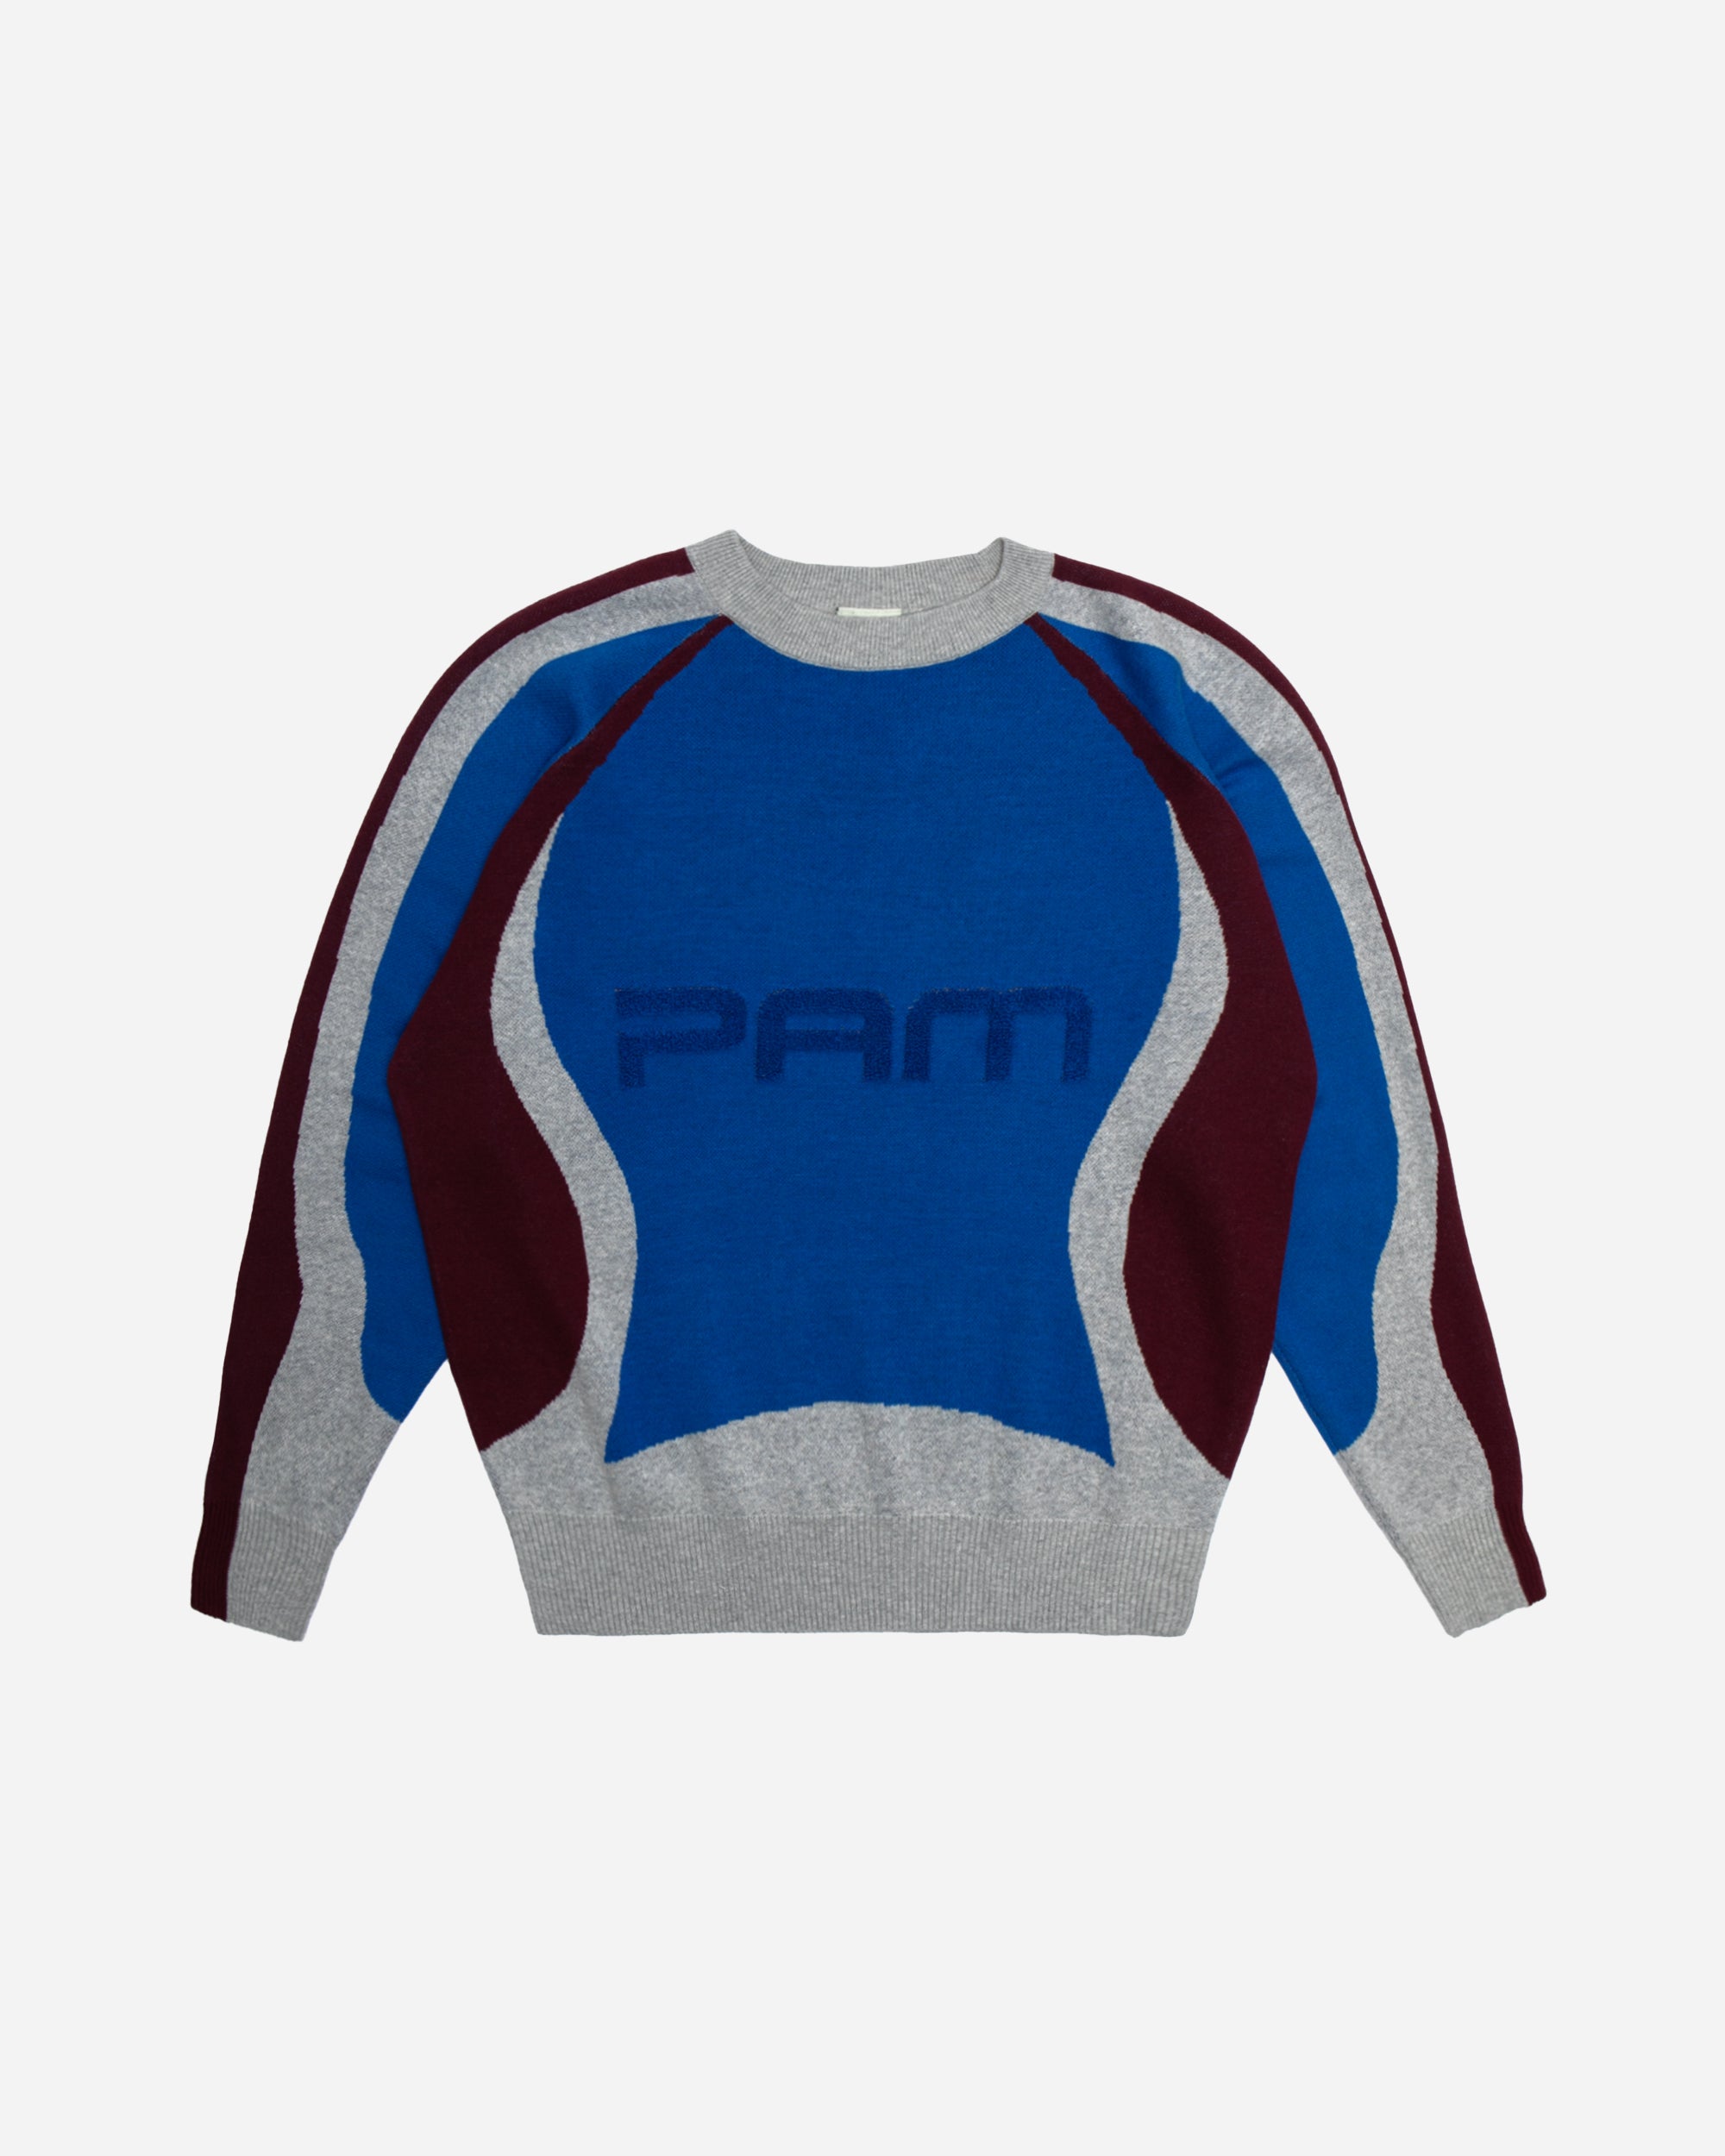 P.A.M Smooth Graphic Knitwear MULTI 8617-MLT